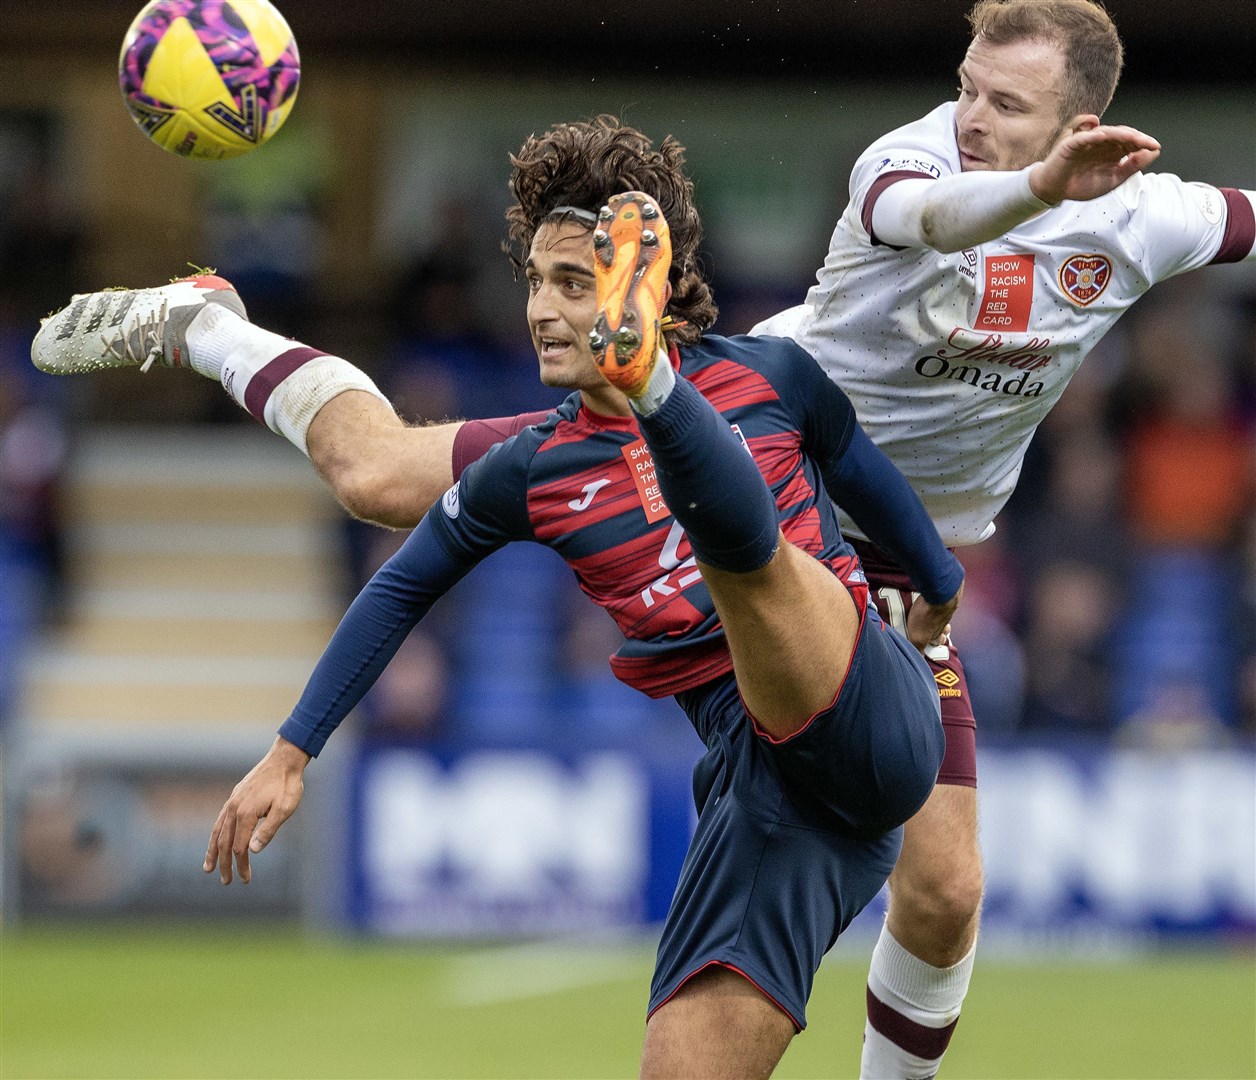 Picture - Ken Macpherson. Ross County(1) v Hearts(2). 30/10/22. Ross County's Yan Dhanda during a strong challenge on Hearts' Andrew Halliday.